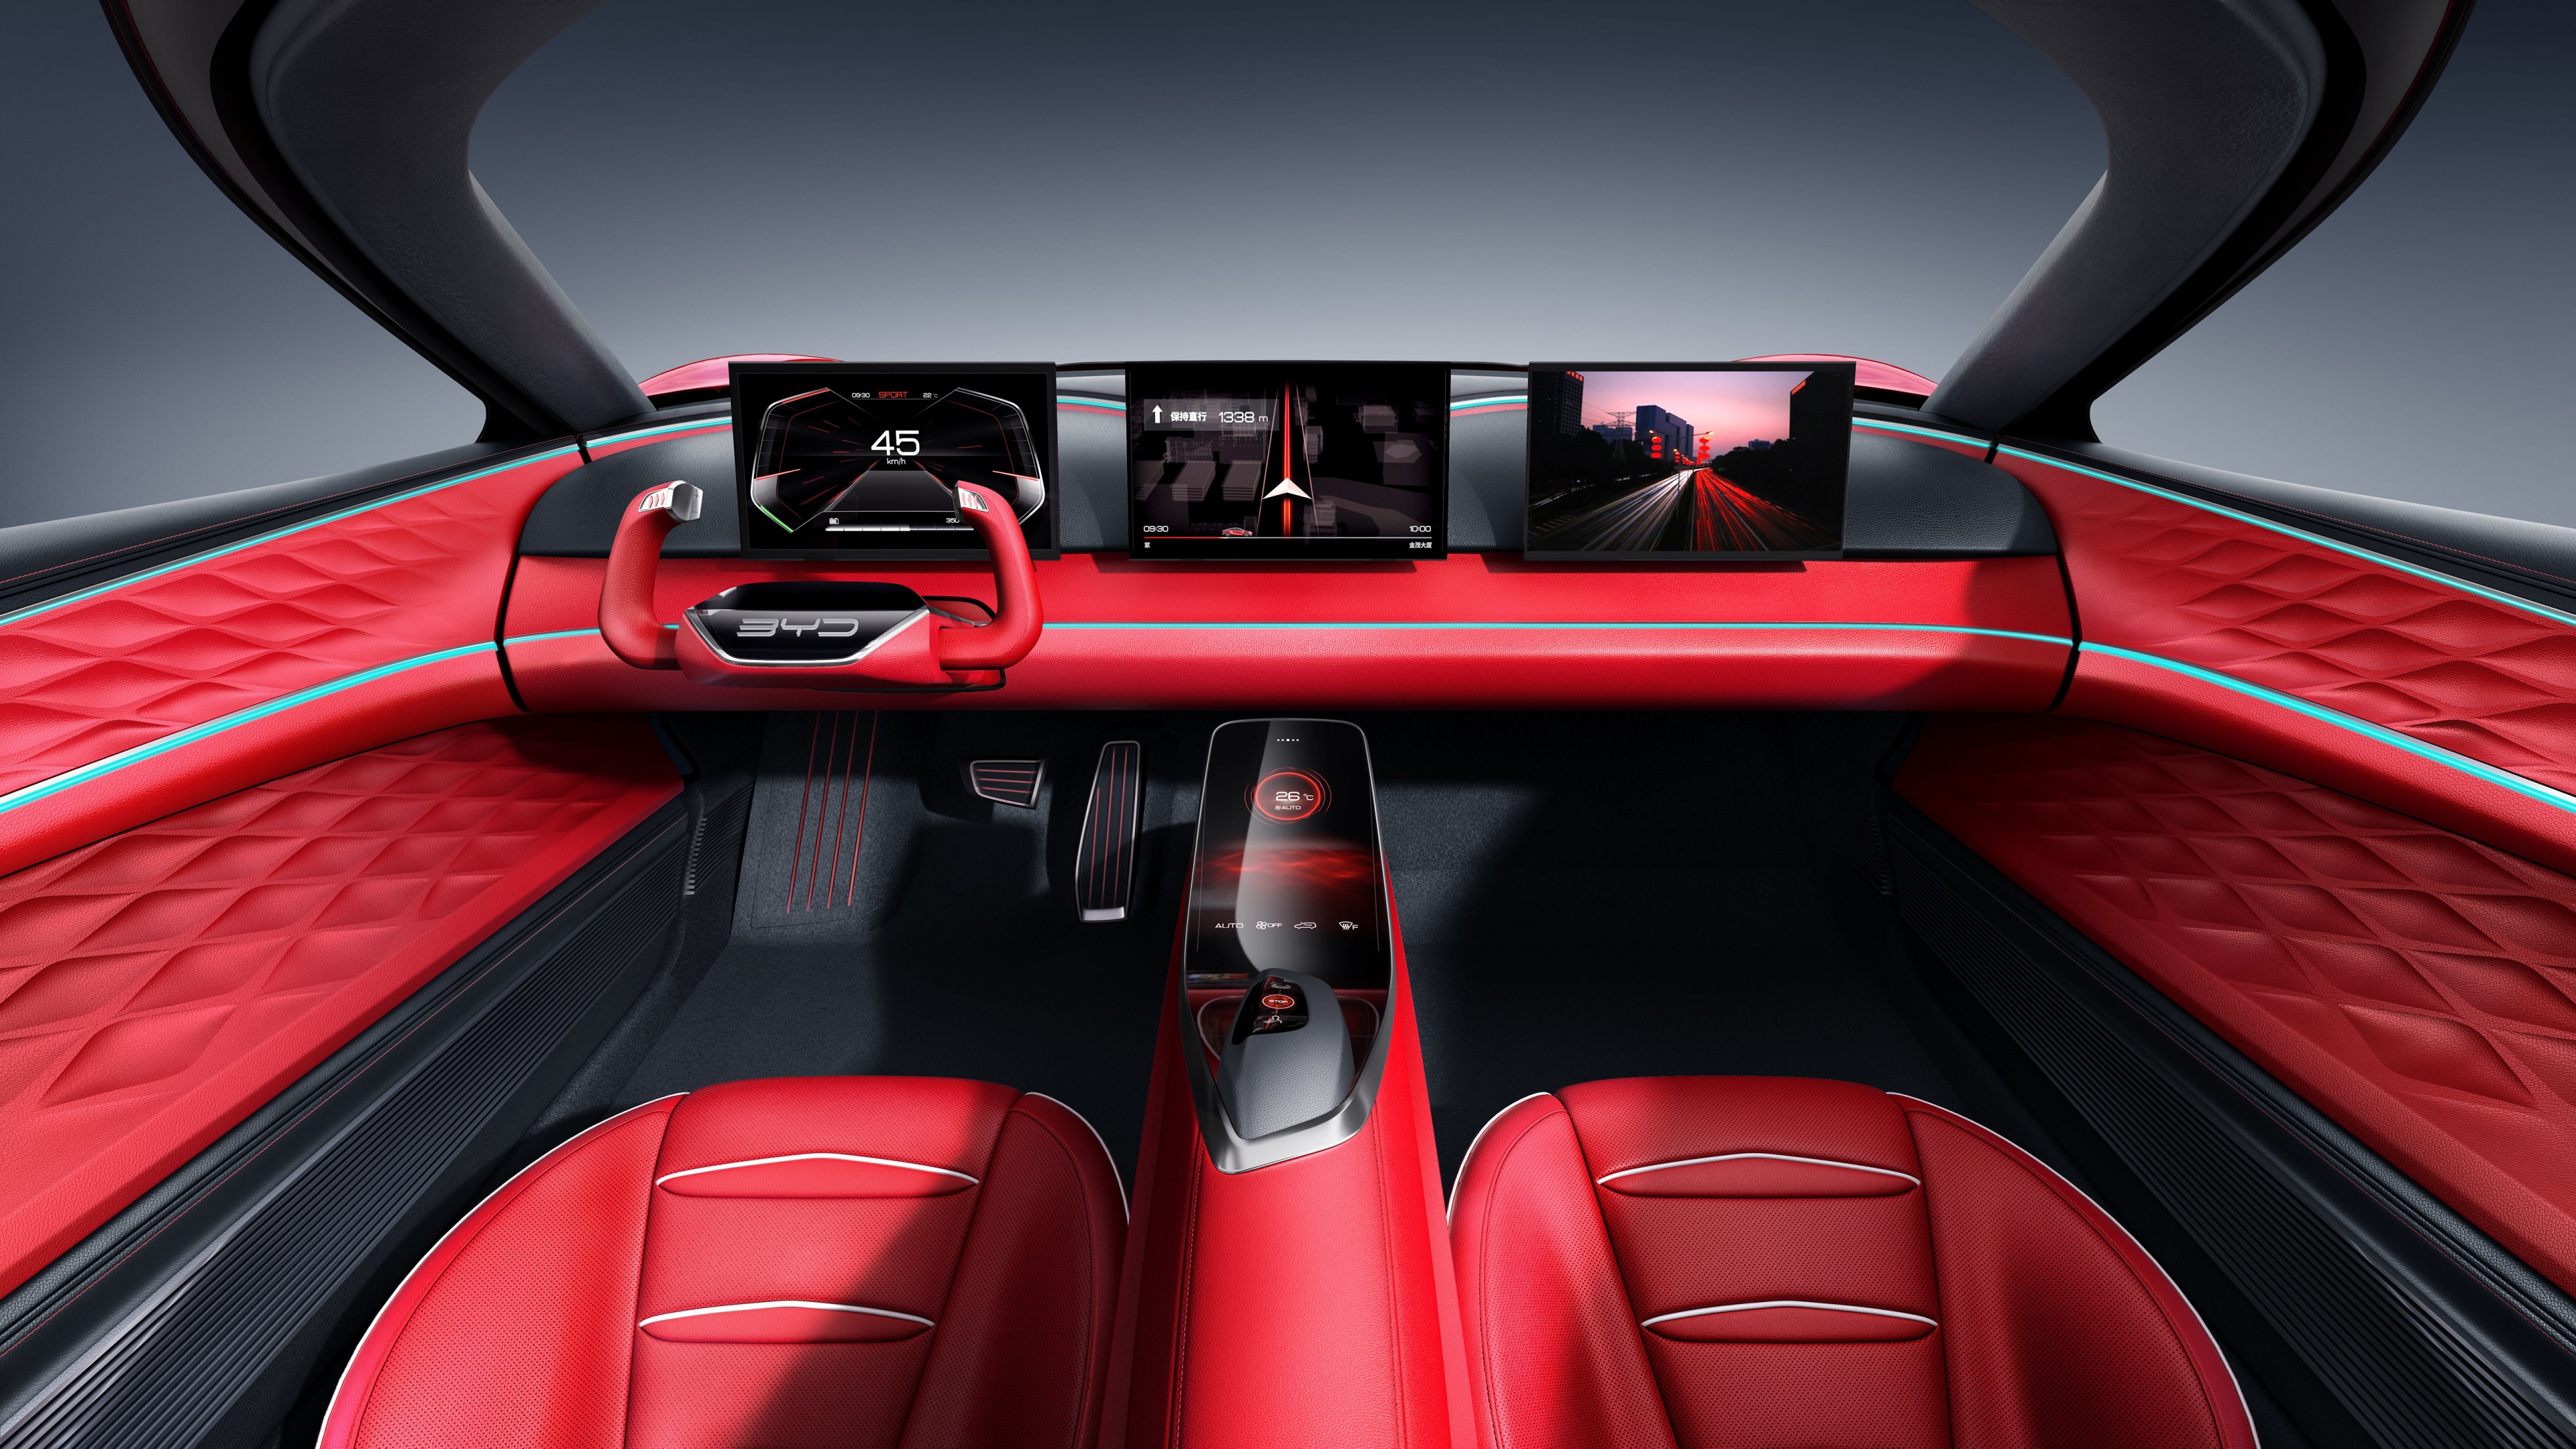 Byd E Seed Gt Interior - HD Wallpaper 